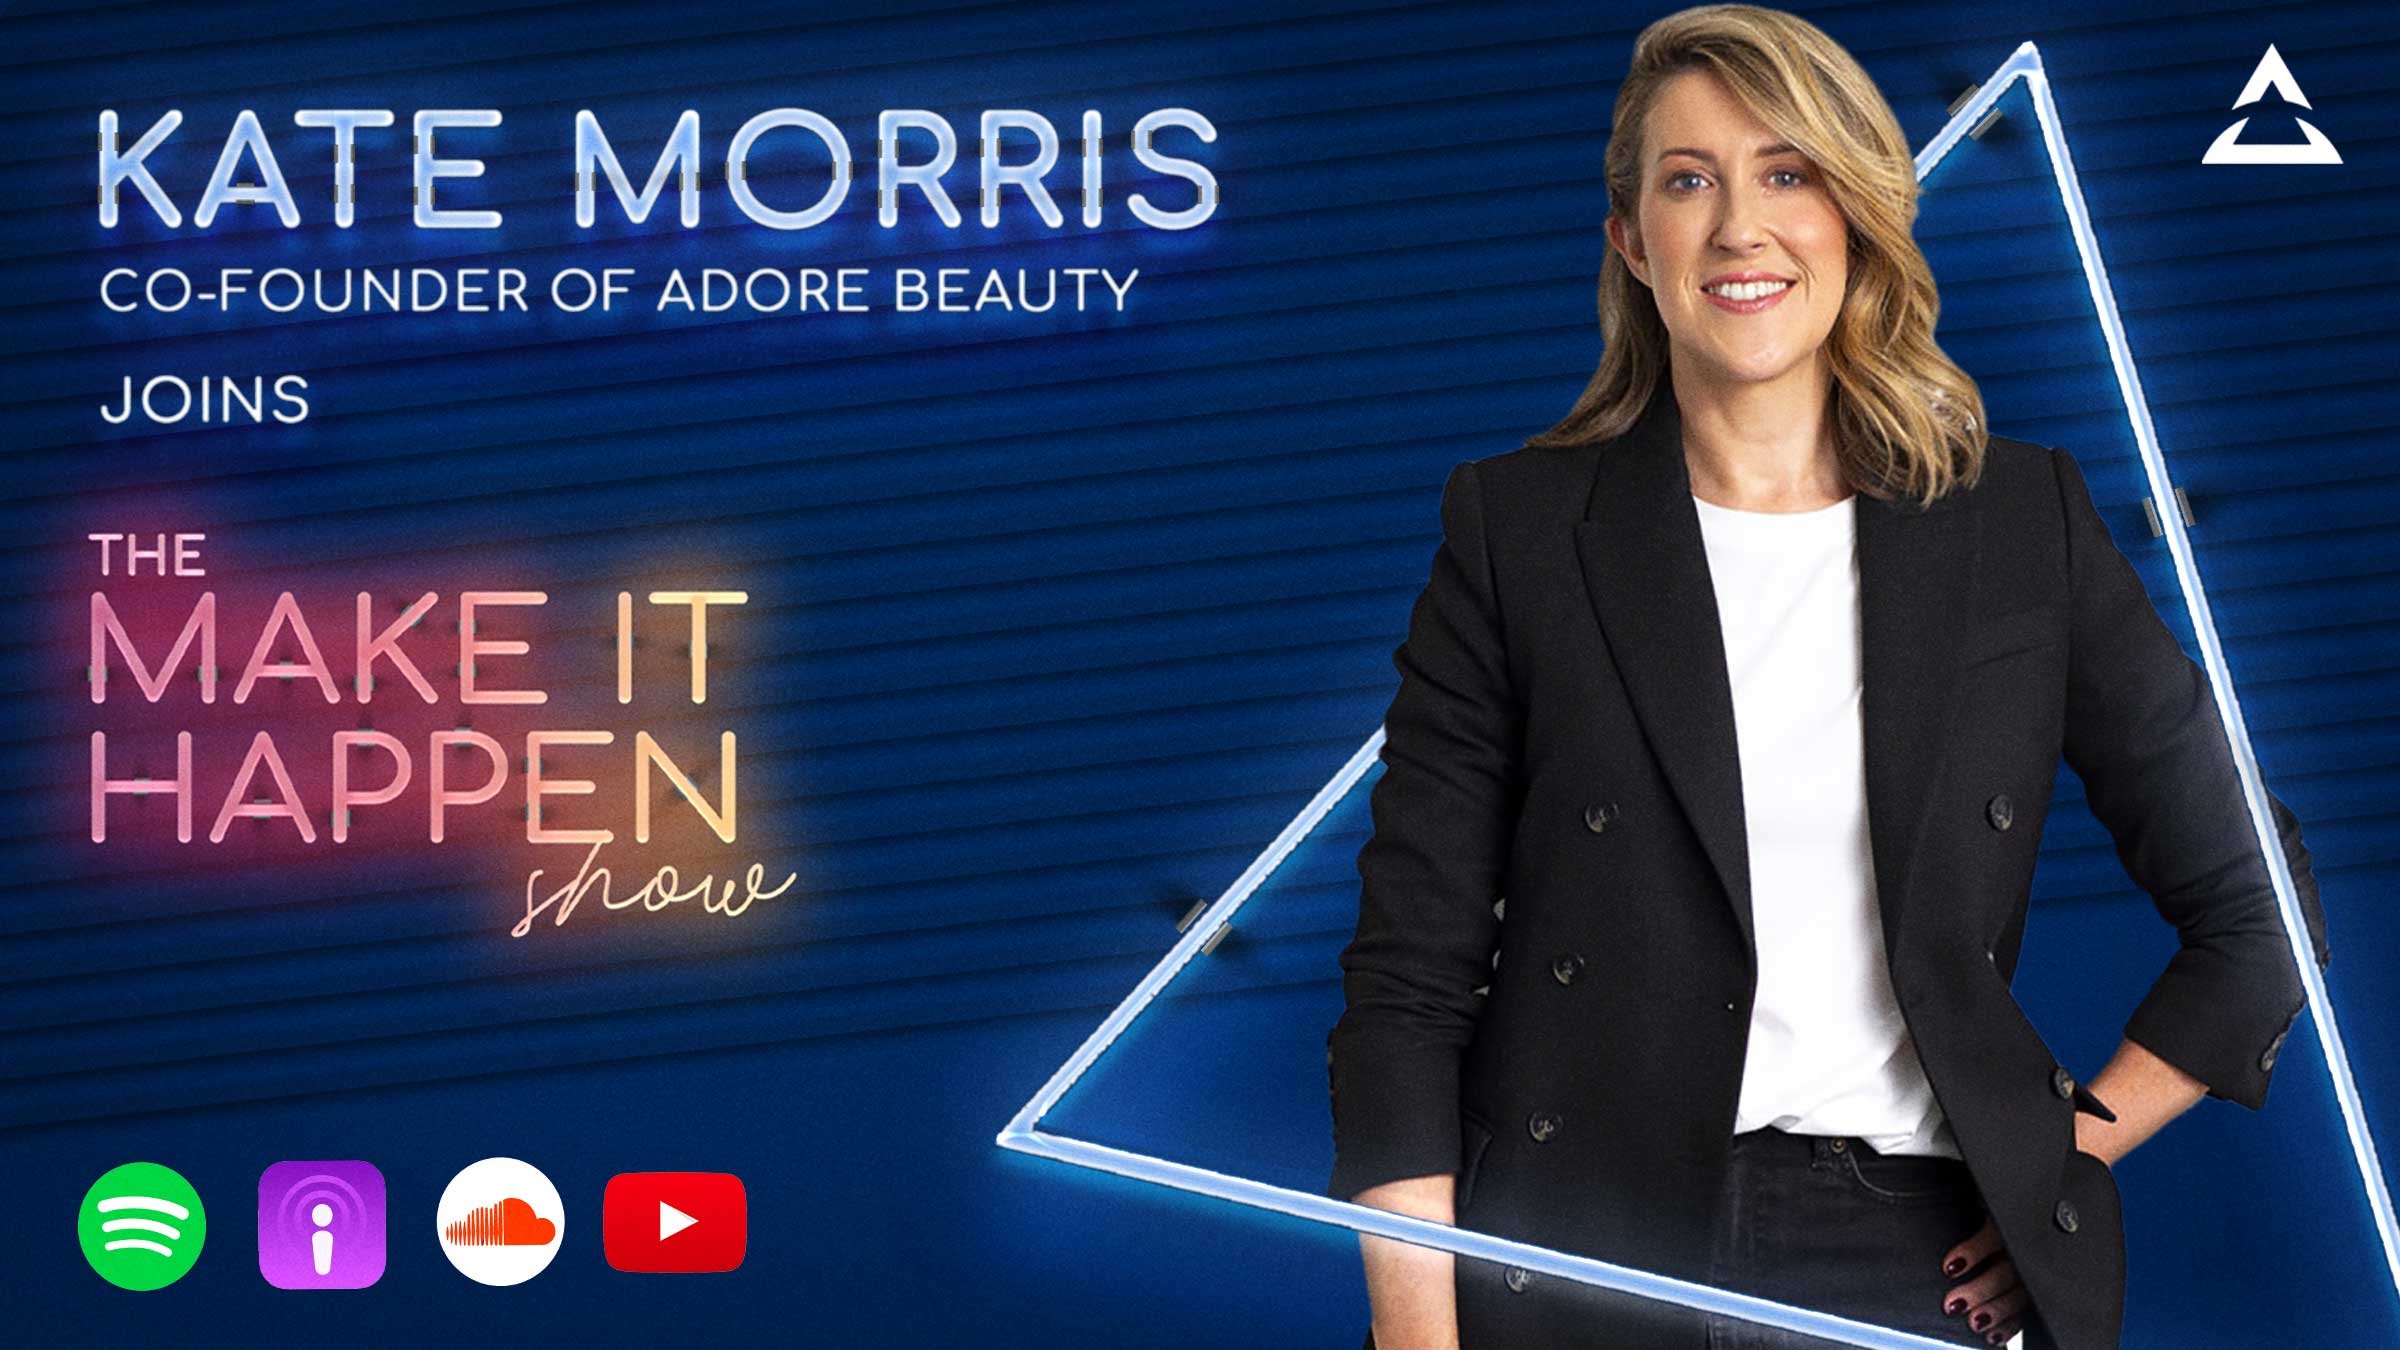 Kate Morris, Co-Founder of Adore Beauty, joins The Make It Happen Show